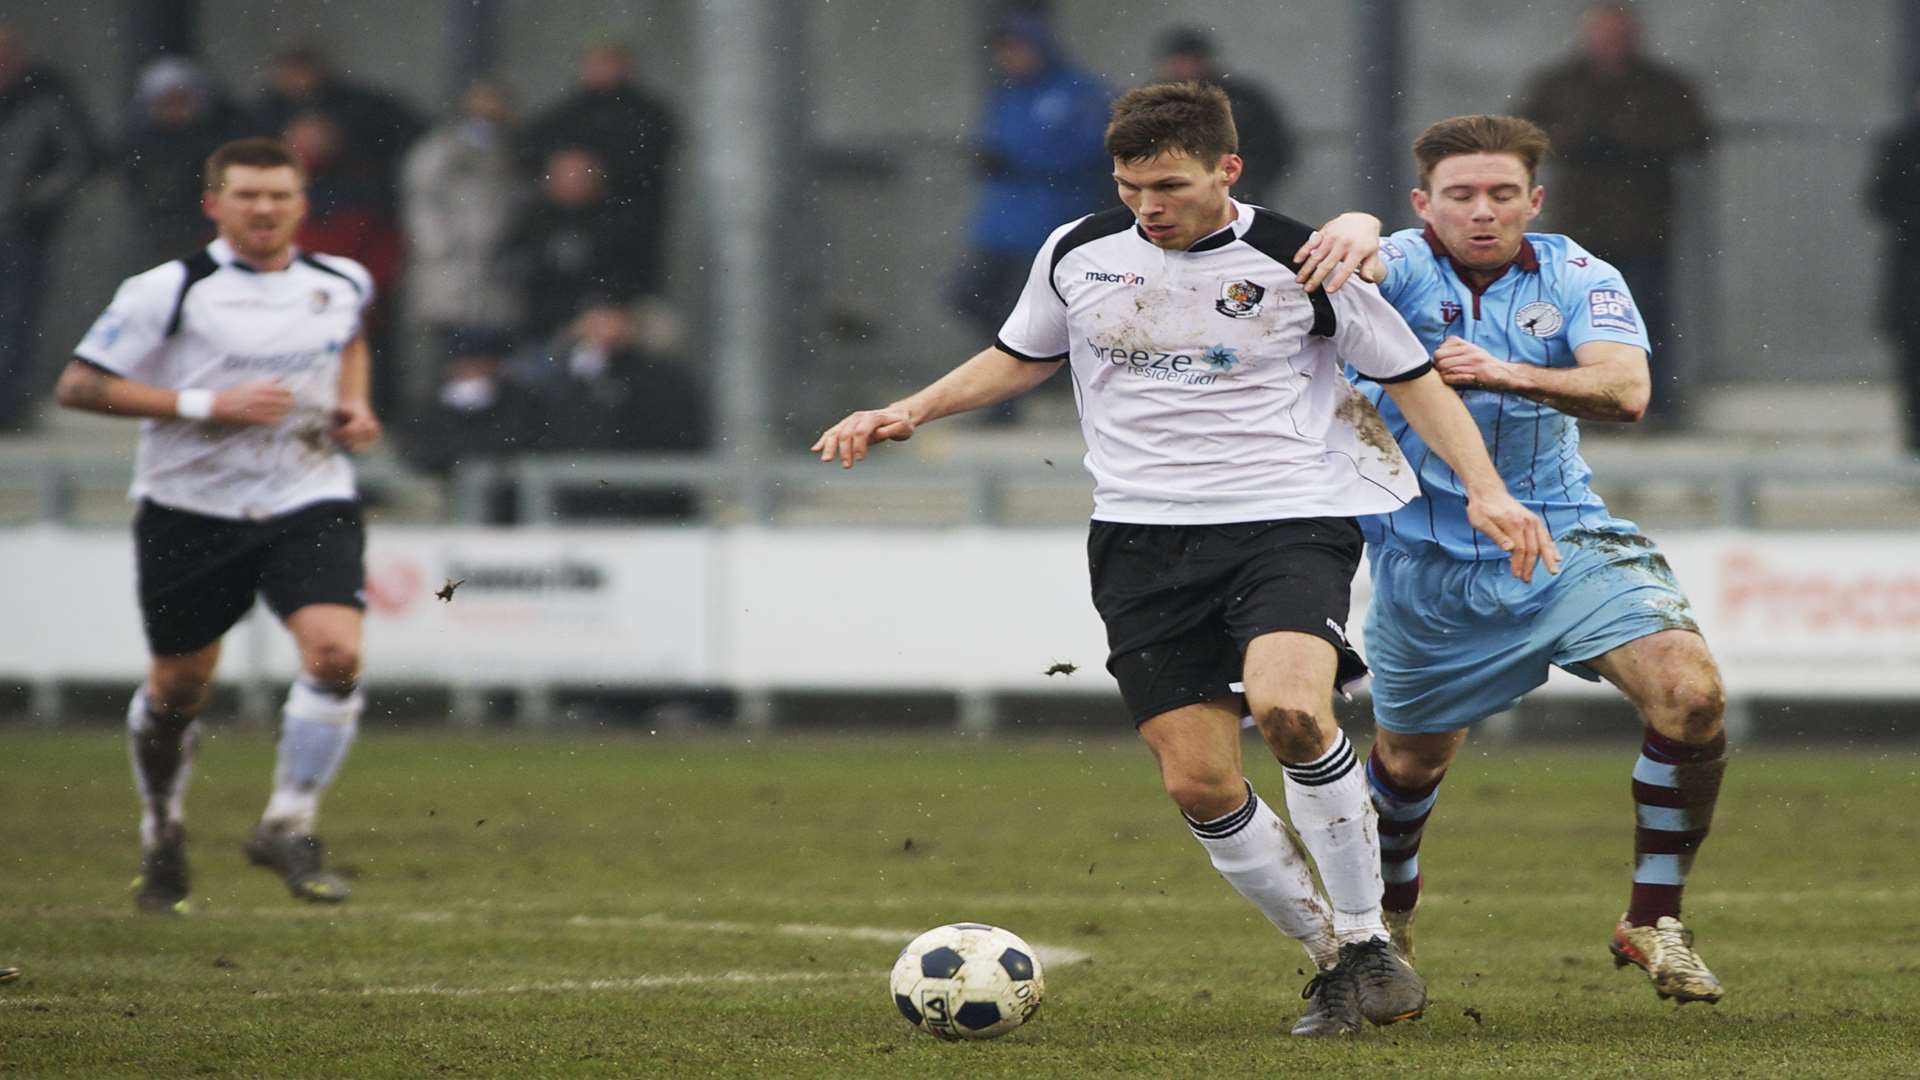 Charlie Sheringham playing for Dartford against Gateshead in 2013 Picture: Andy Payton